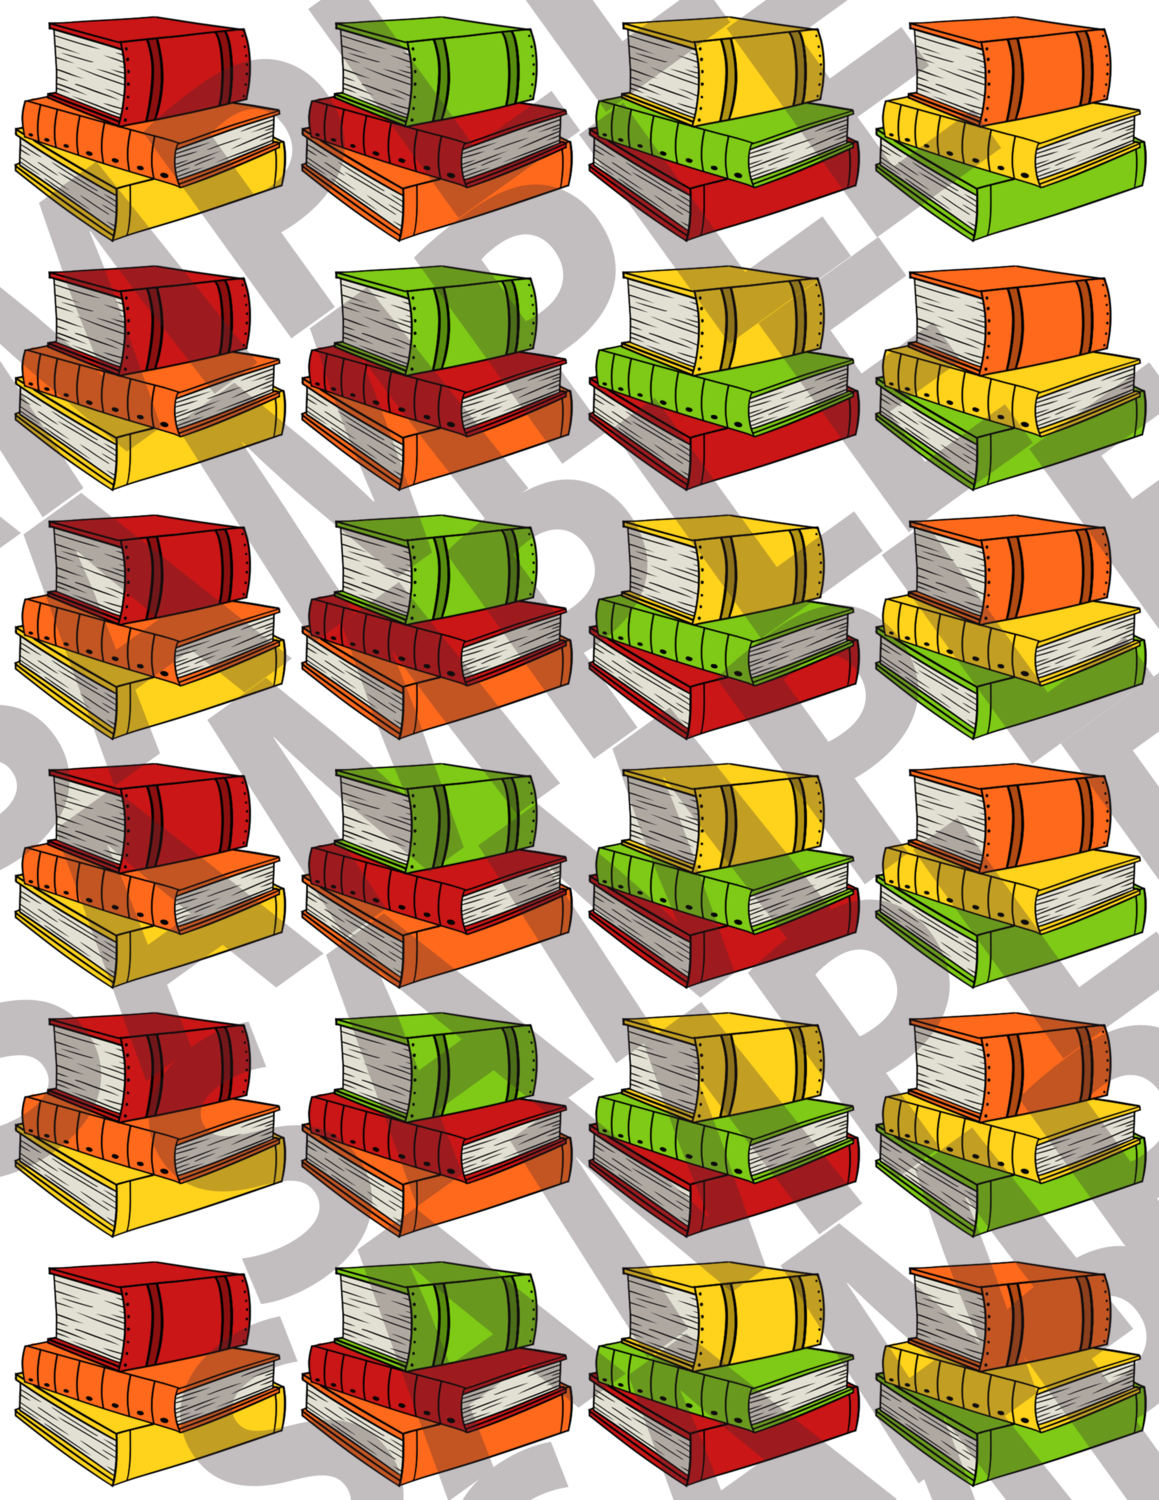 Apples & Oranges - Stacked Books